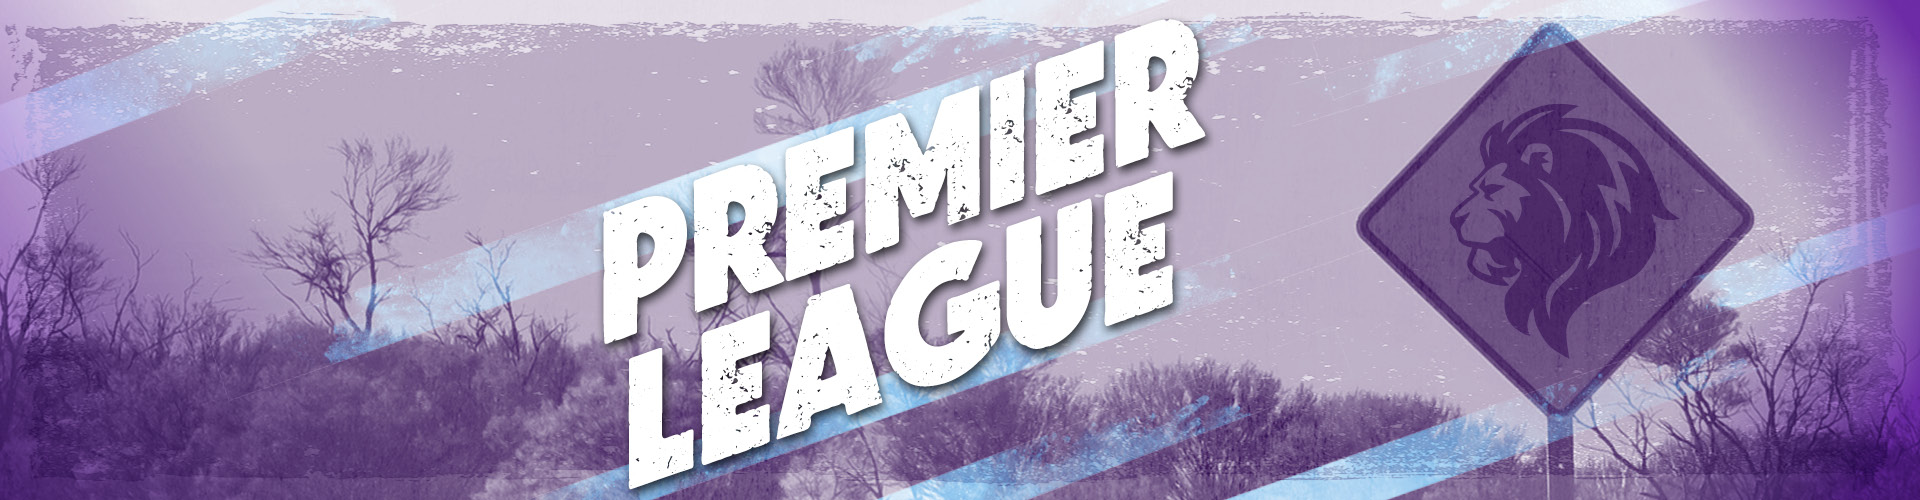 Premier League Football at Walkabout